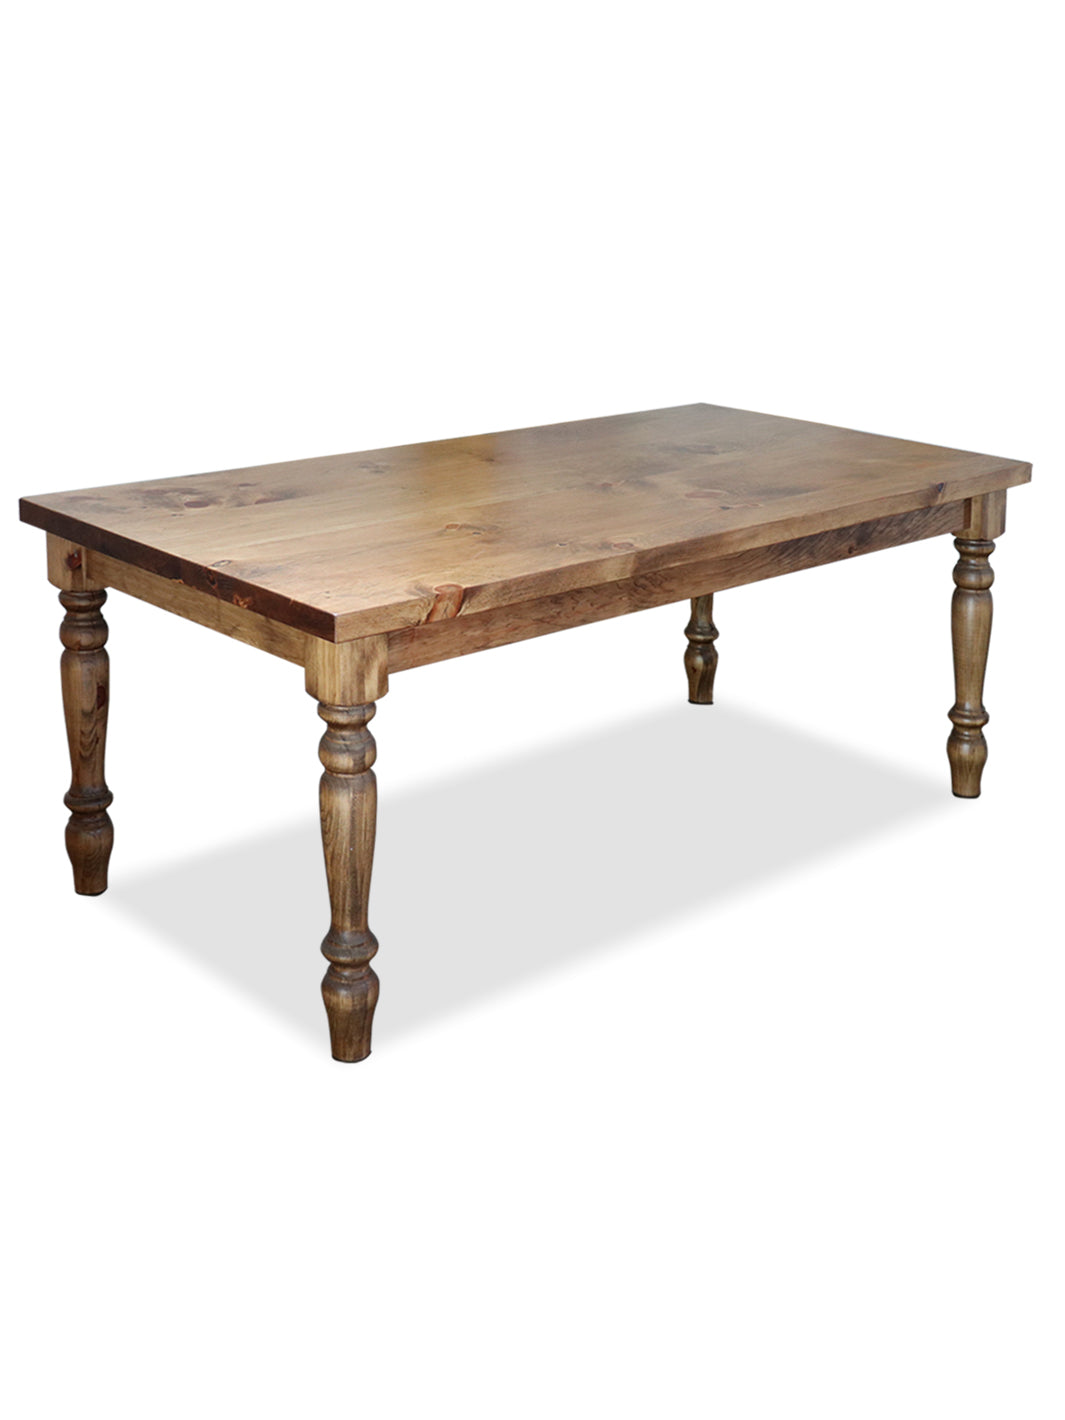 Medium-Tone White Pine Farmhouse Dining Table with Thick Top Earthly Comfort Dining Tables 1849